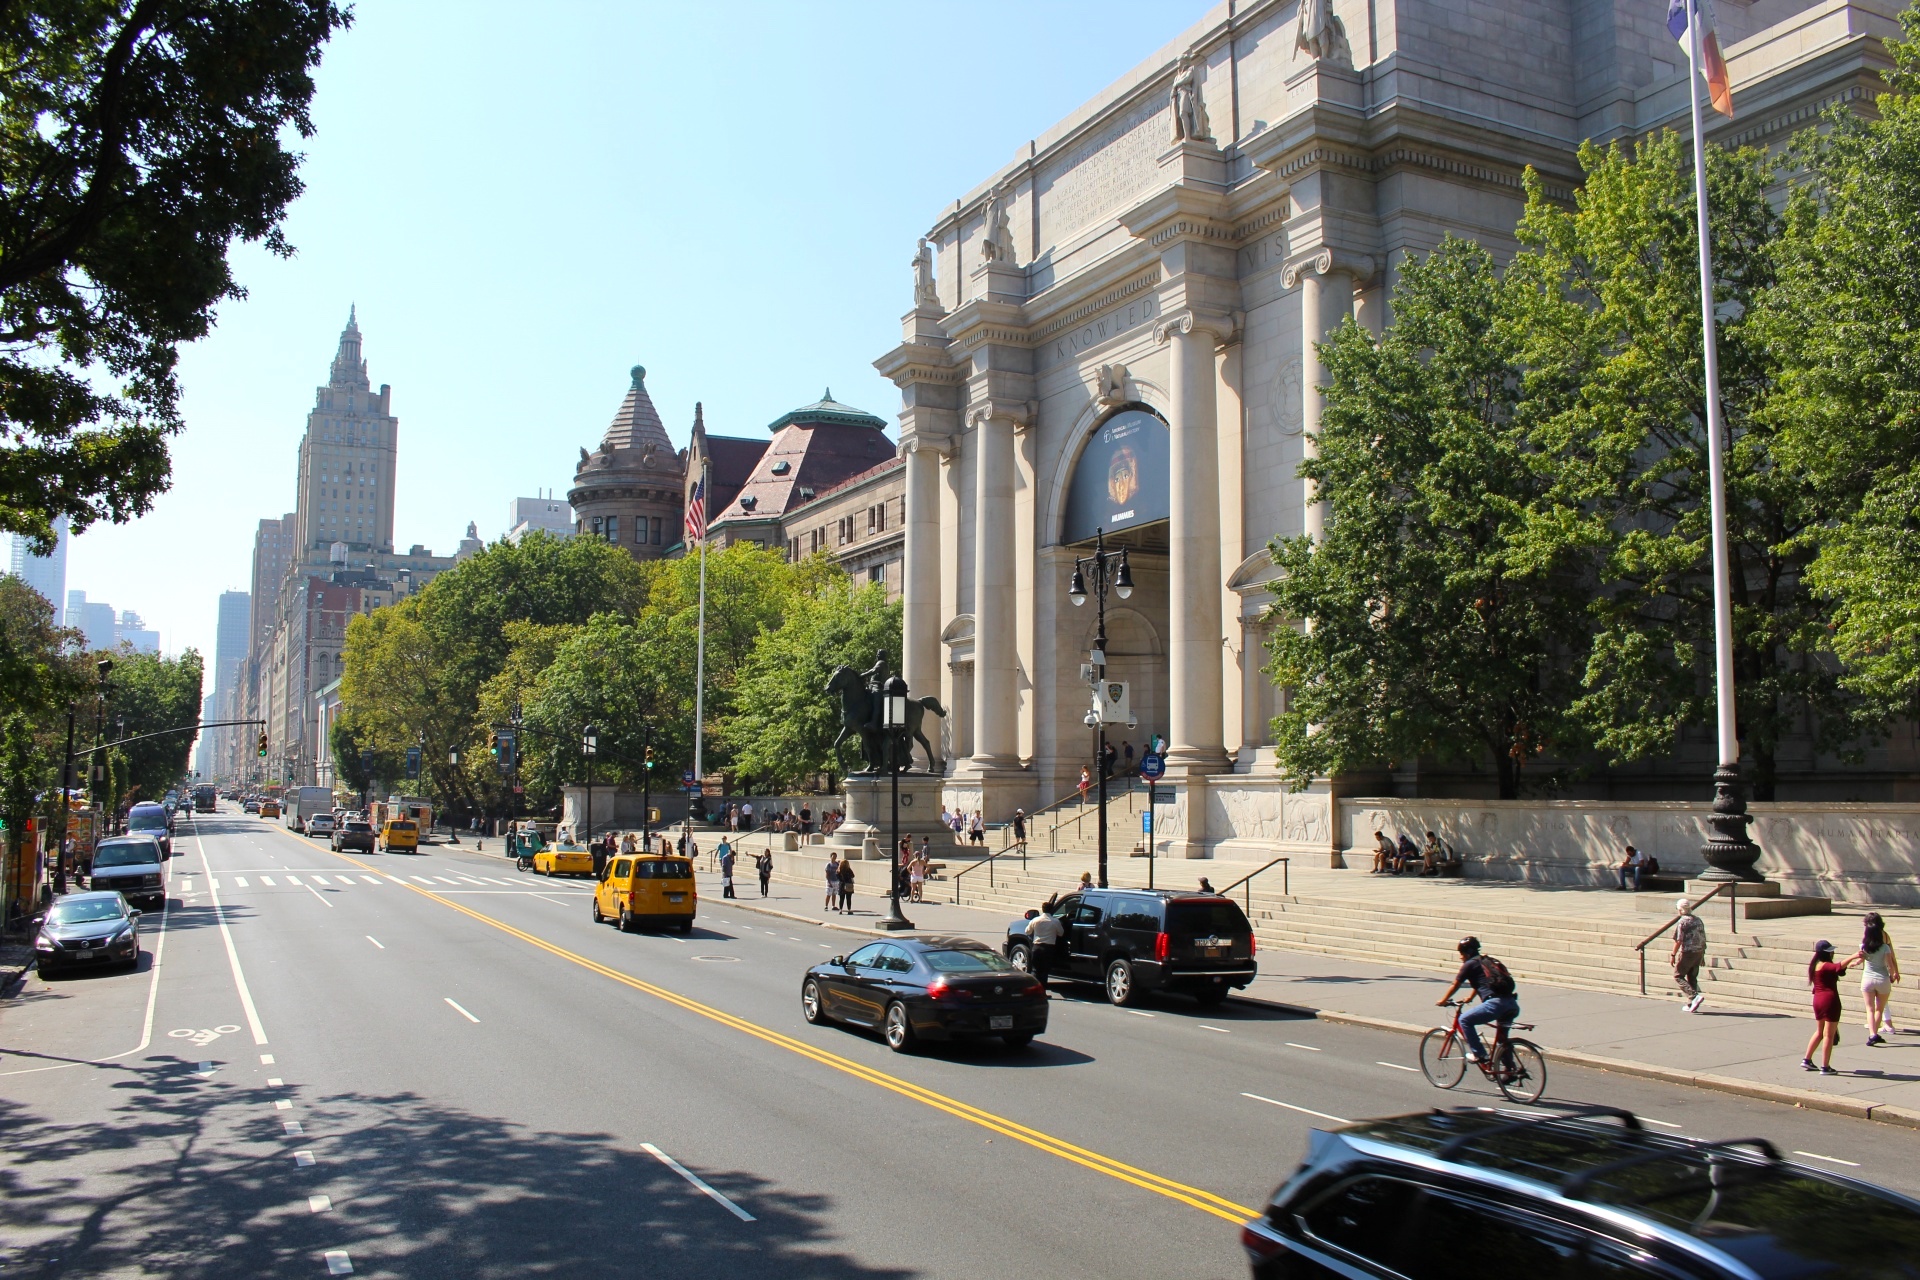 After local condo board sues, judge rules that Central Park West bike lane can go forward